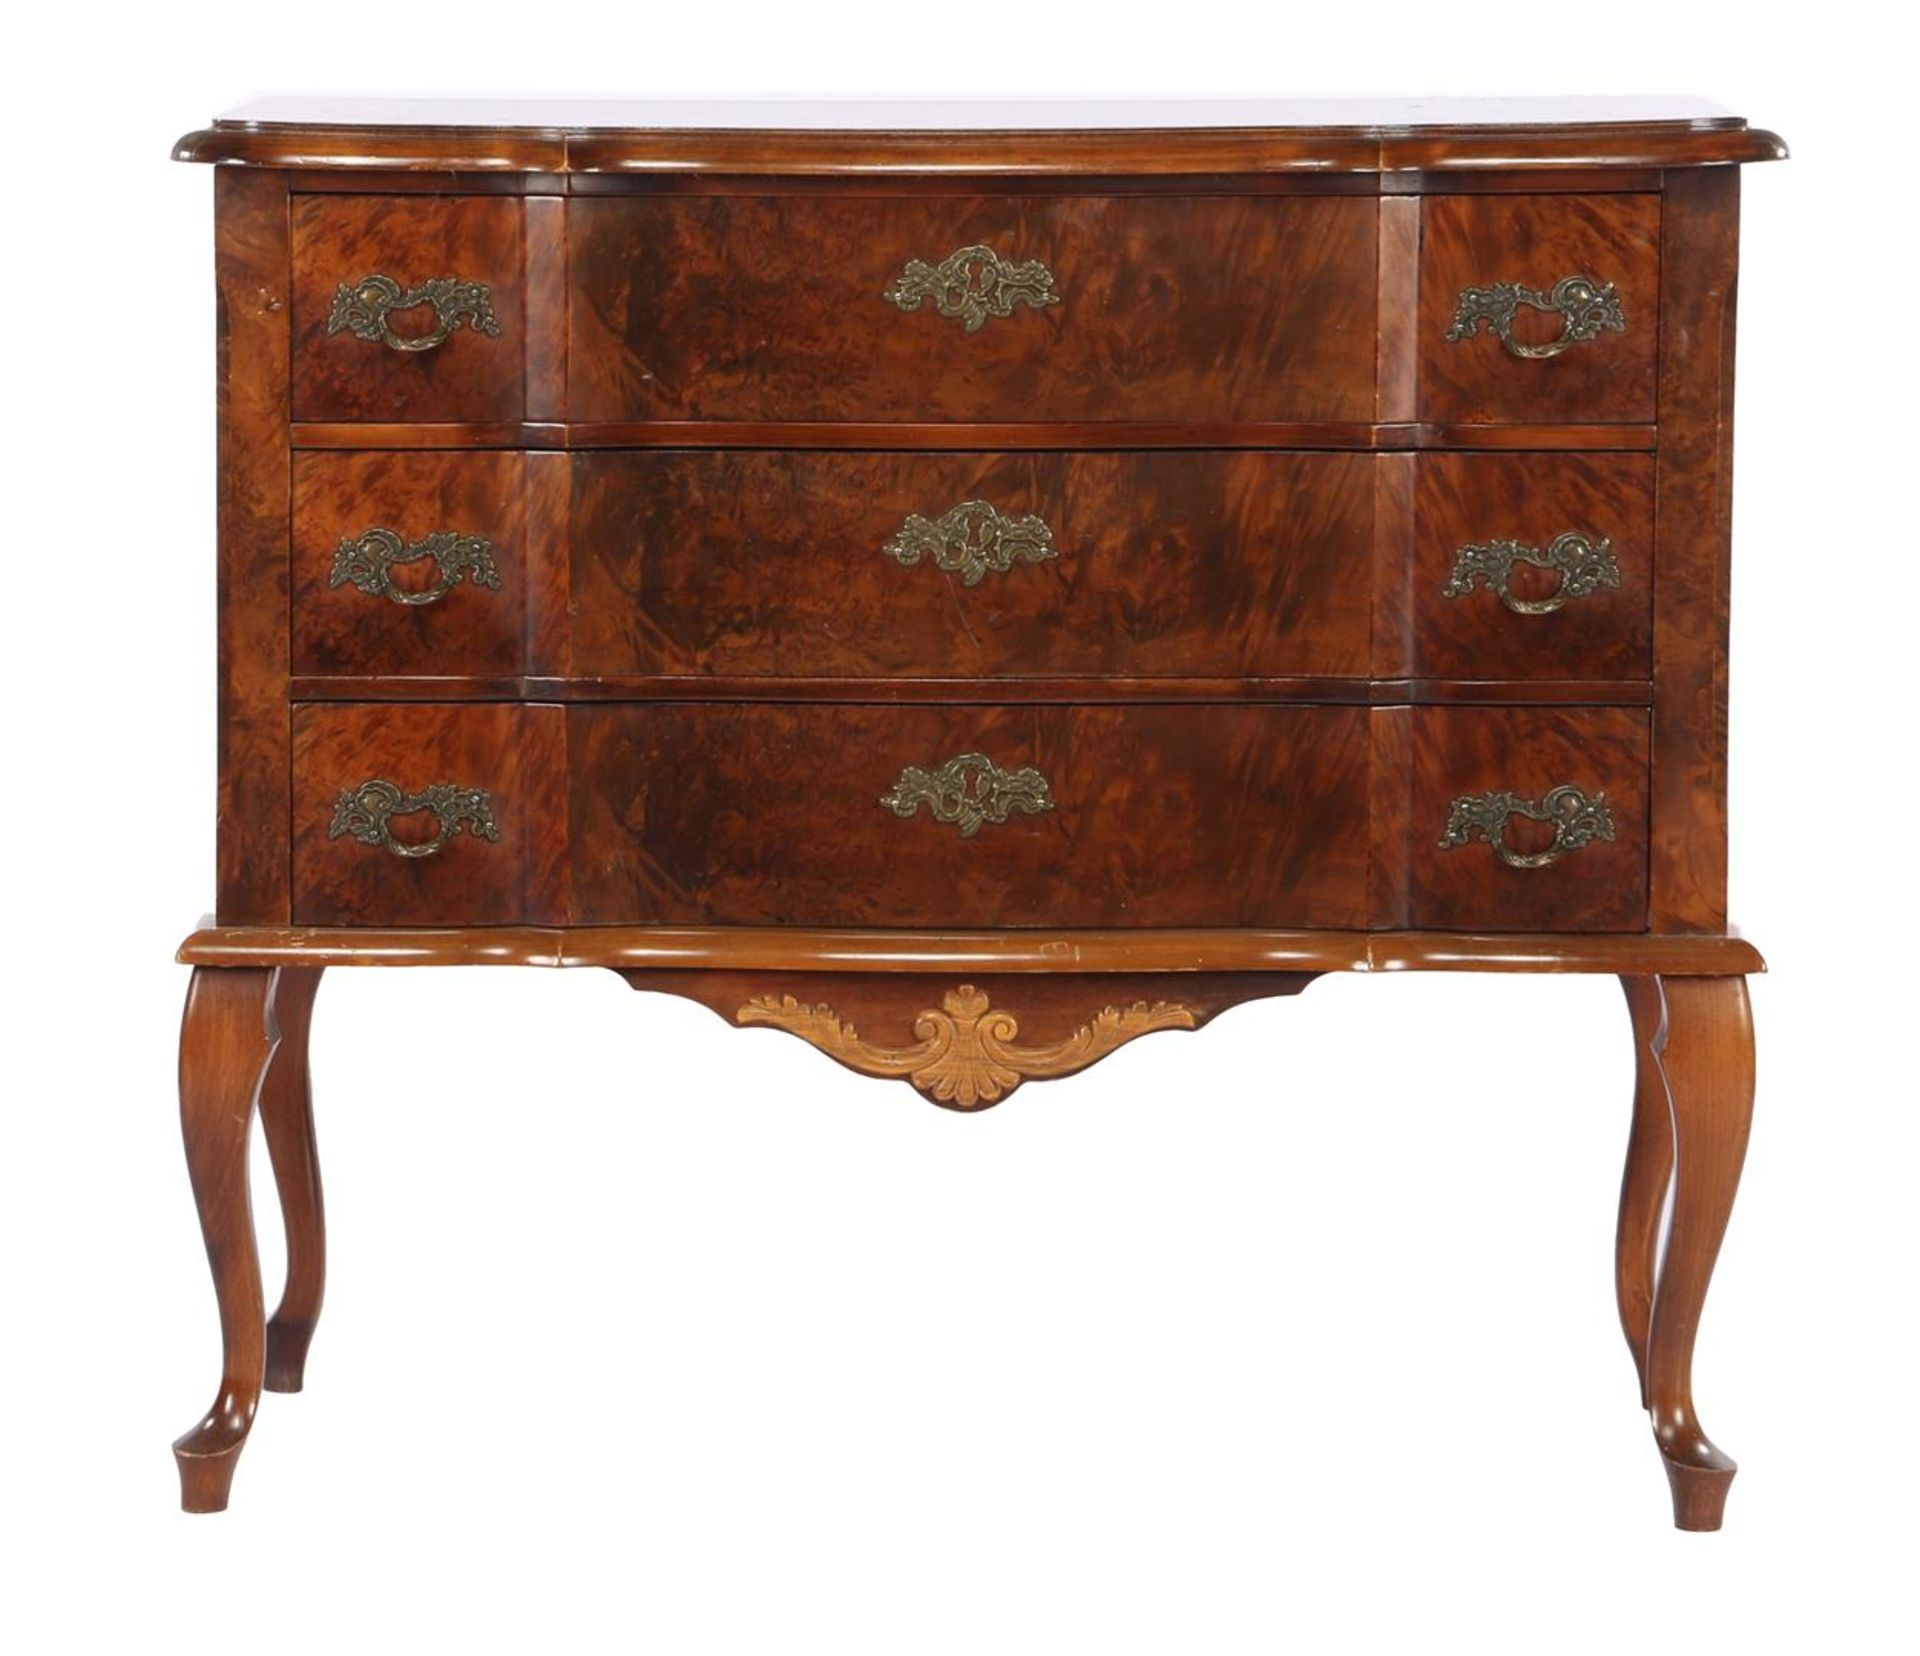 Nuts with burr walnut cabinet with 3 drawers, standing on legs, 75 cm high, 86 cm wide, 40 cm deep